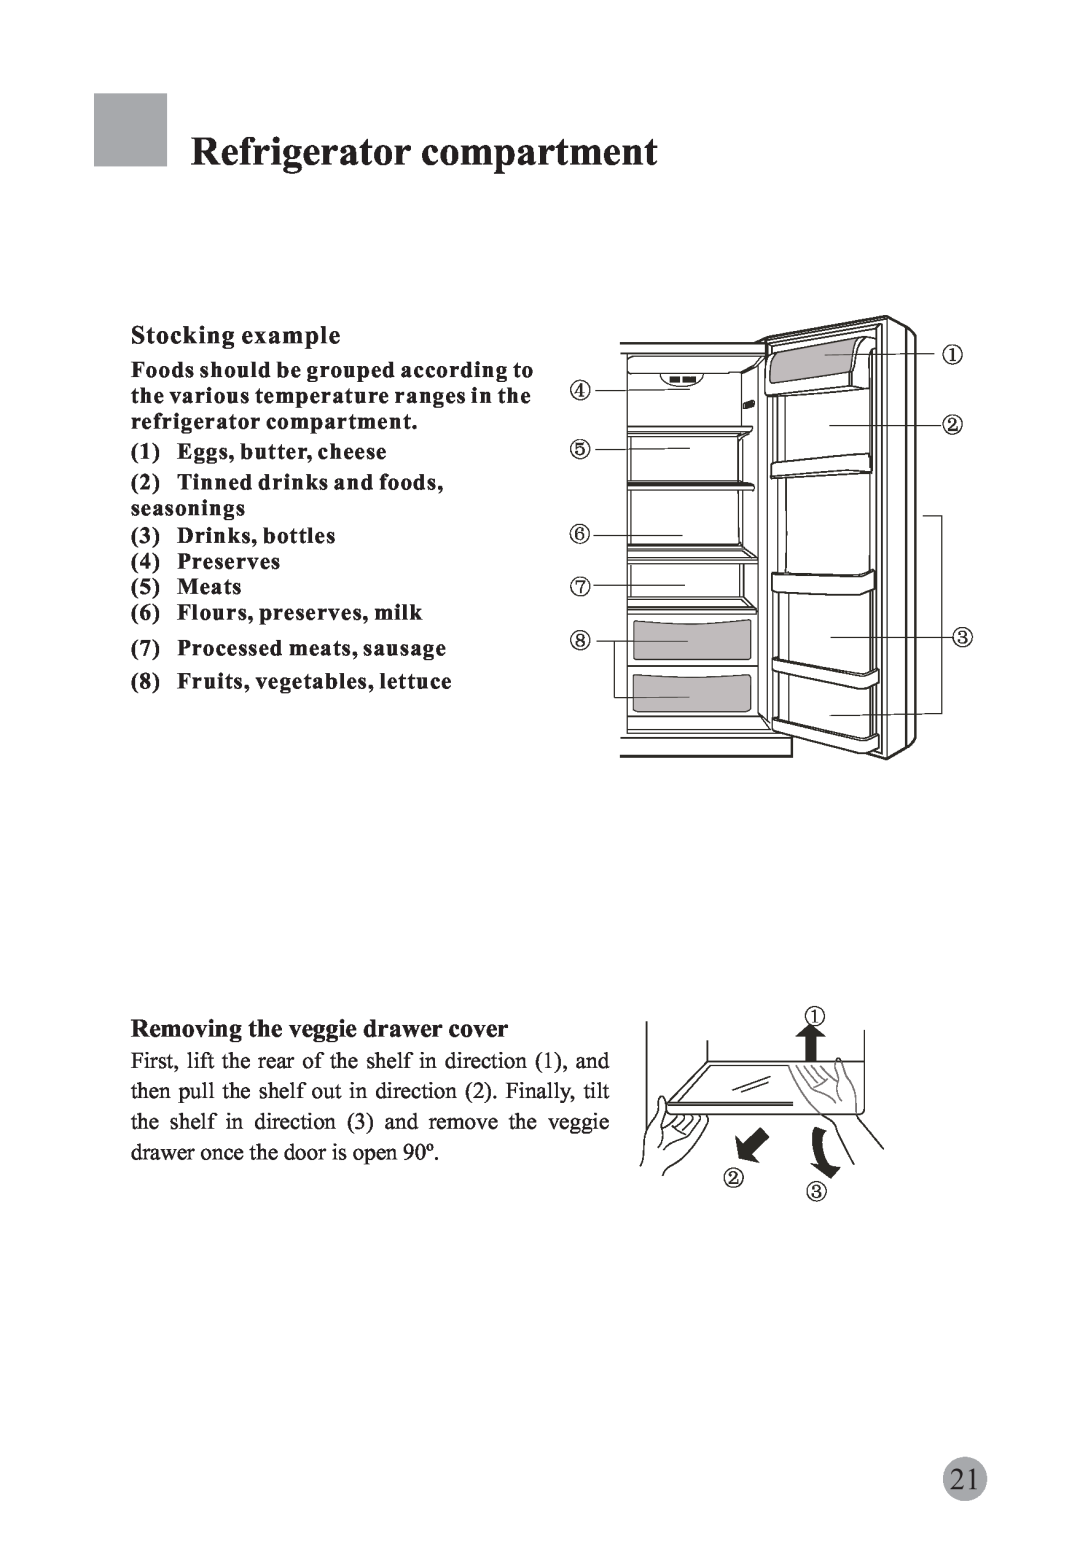 Haier HRF-663CJ manual Stocking example, Removing the veggie drawer cover, Refrigerator compartment, Eggs, butter, cheese 